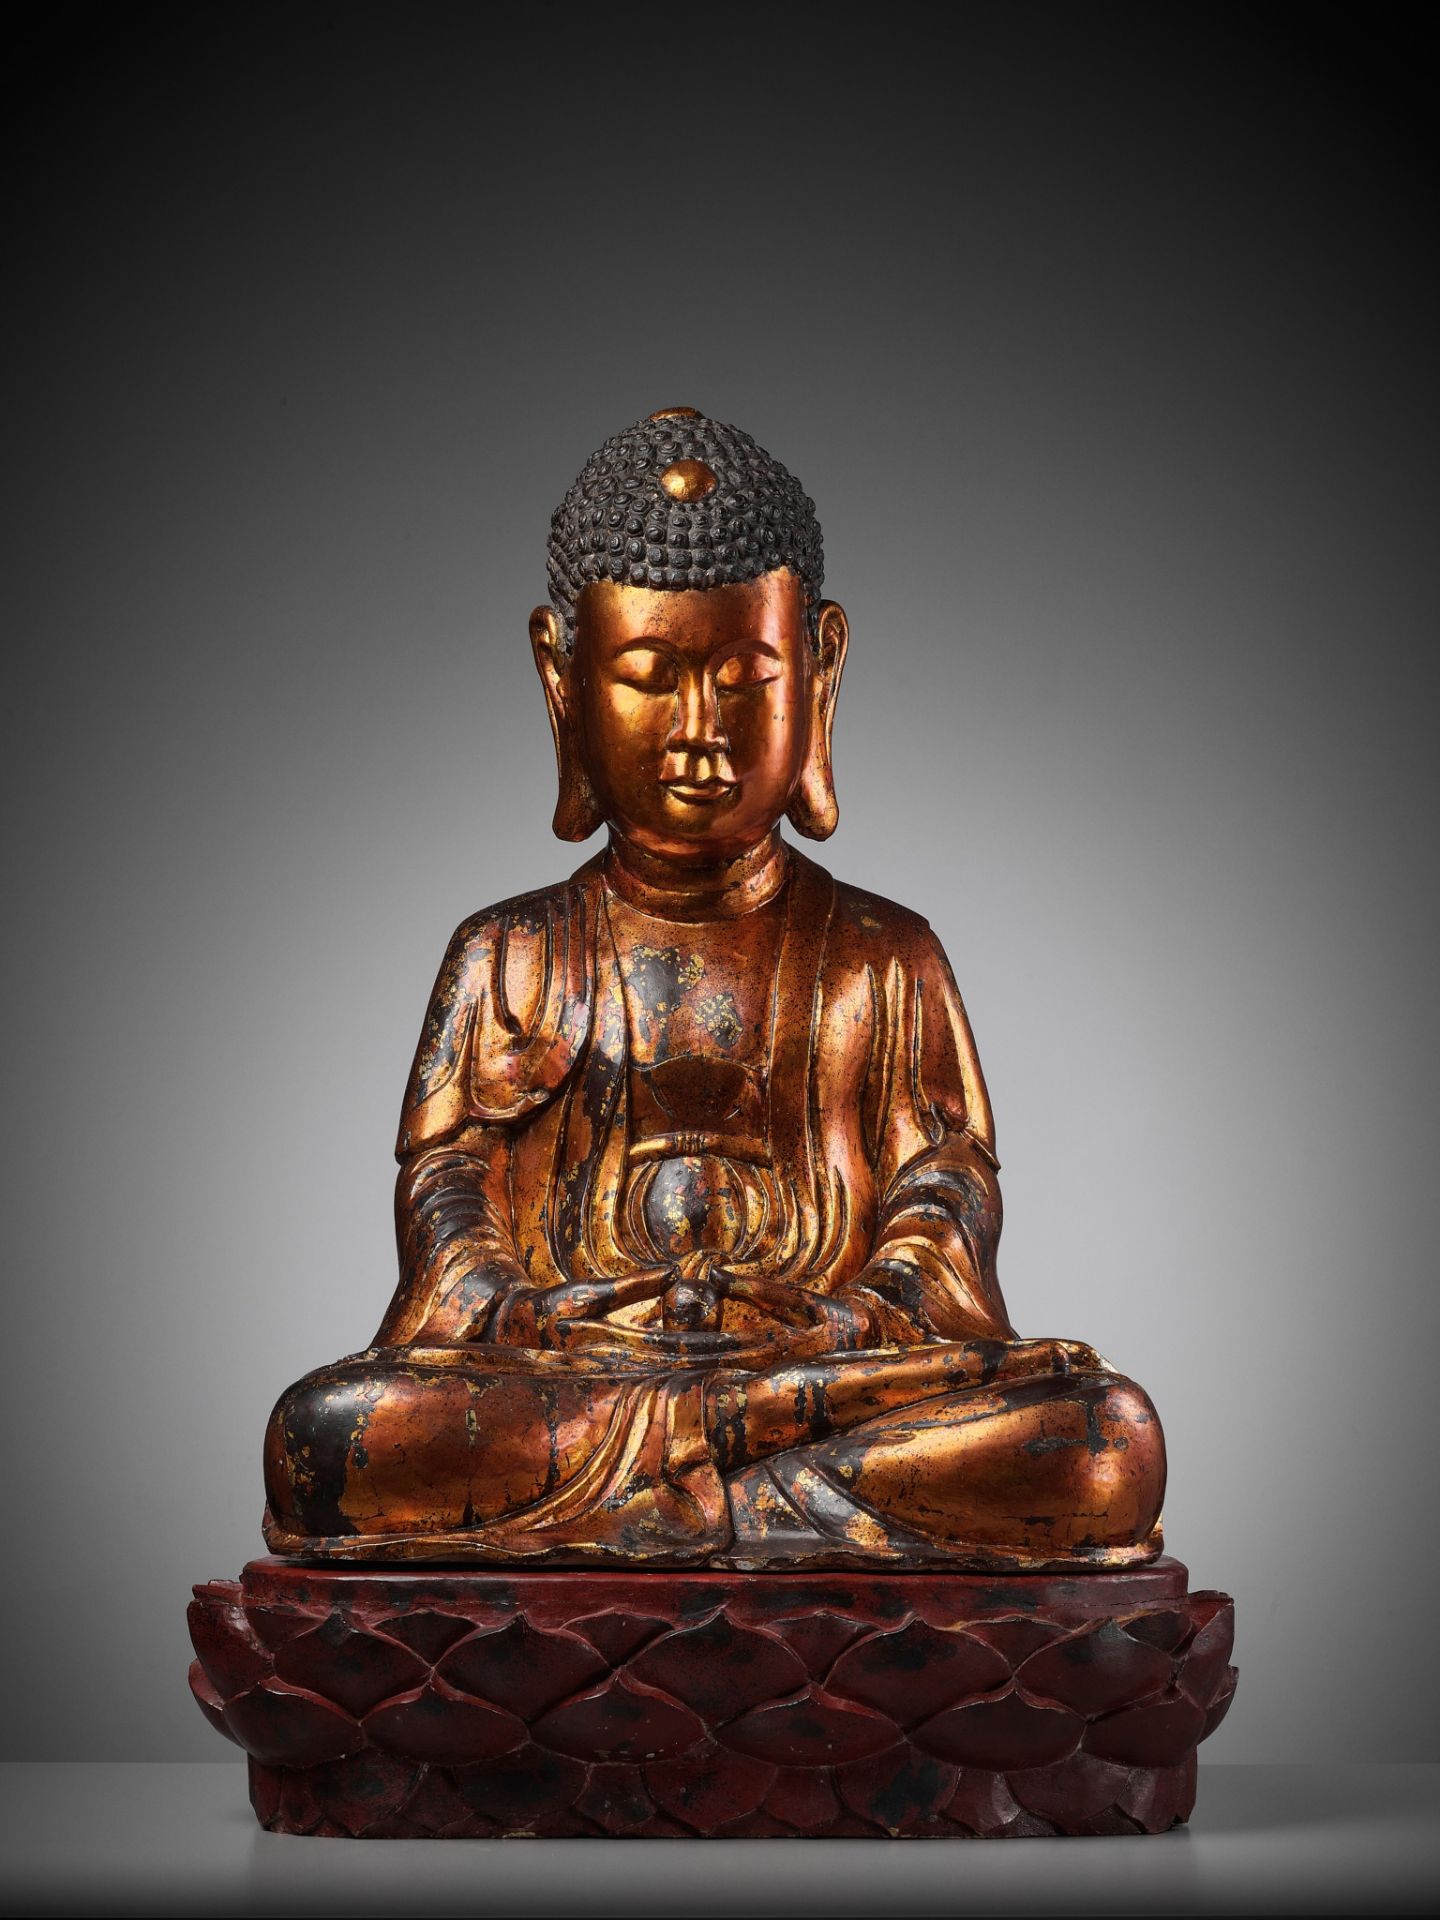 AN EXTRAORDINARY LARGE GILT-LACQUER WOOD STATUE OF BUDDHA, VIETNAM, 17TH-18TH CENTURY - Image 3 of 11